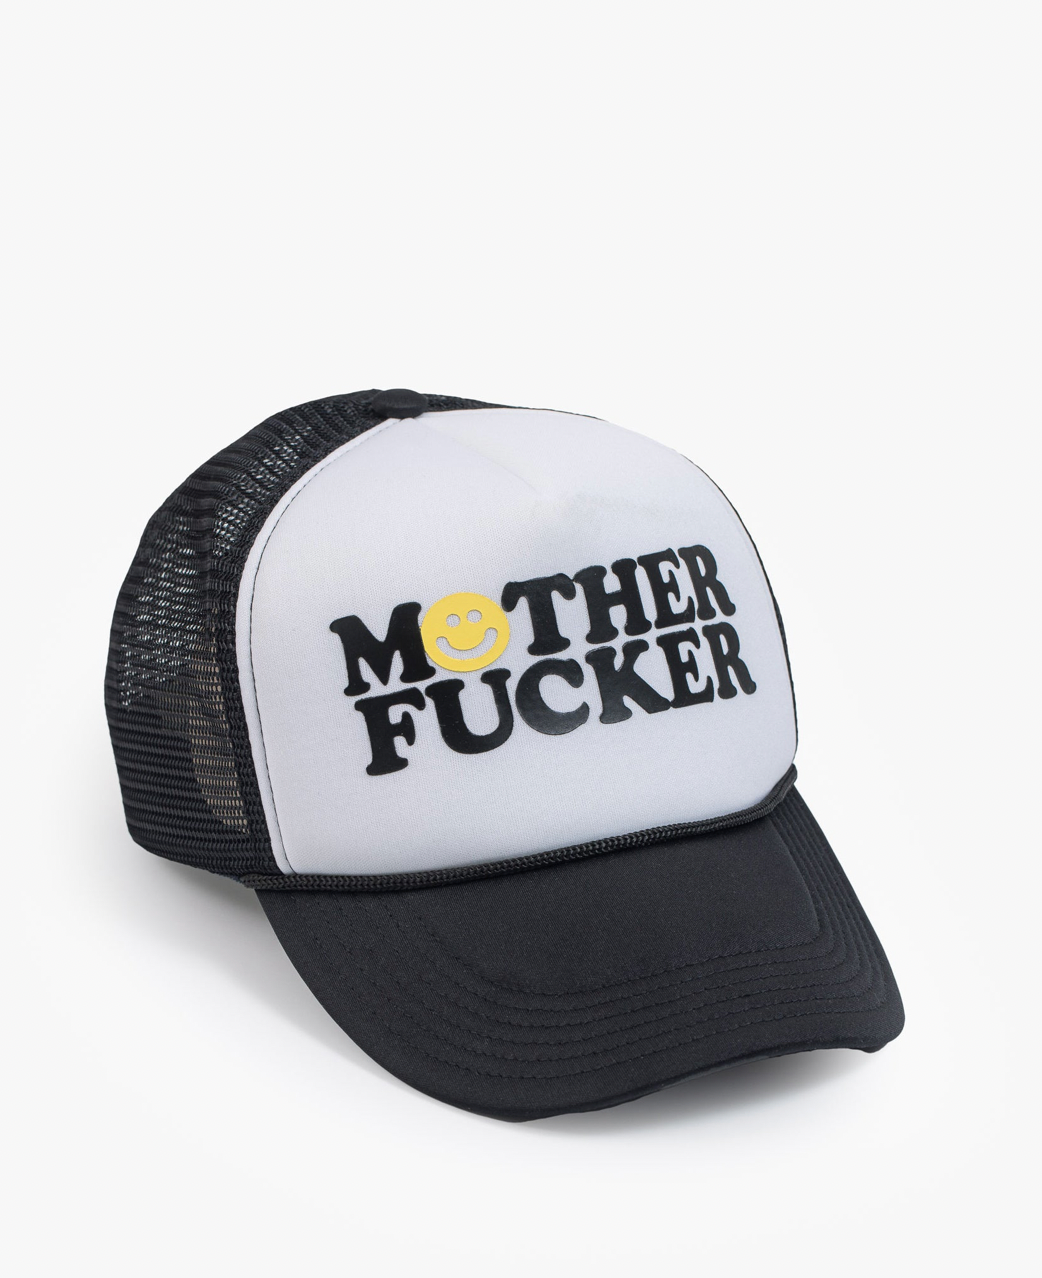 MOTHER THE 10-4 TRUCKER HAT